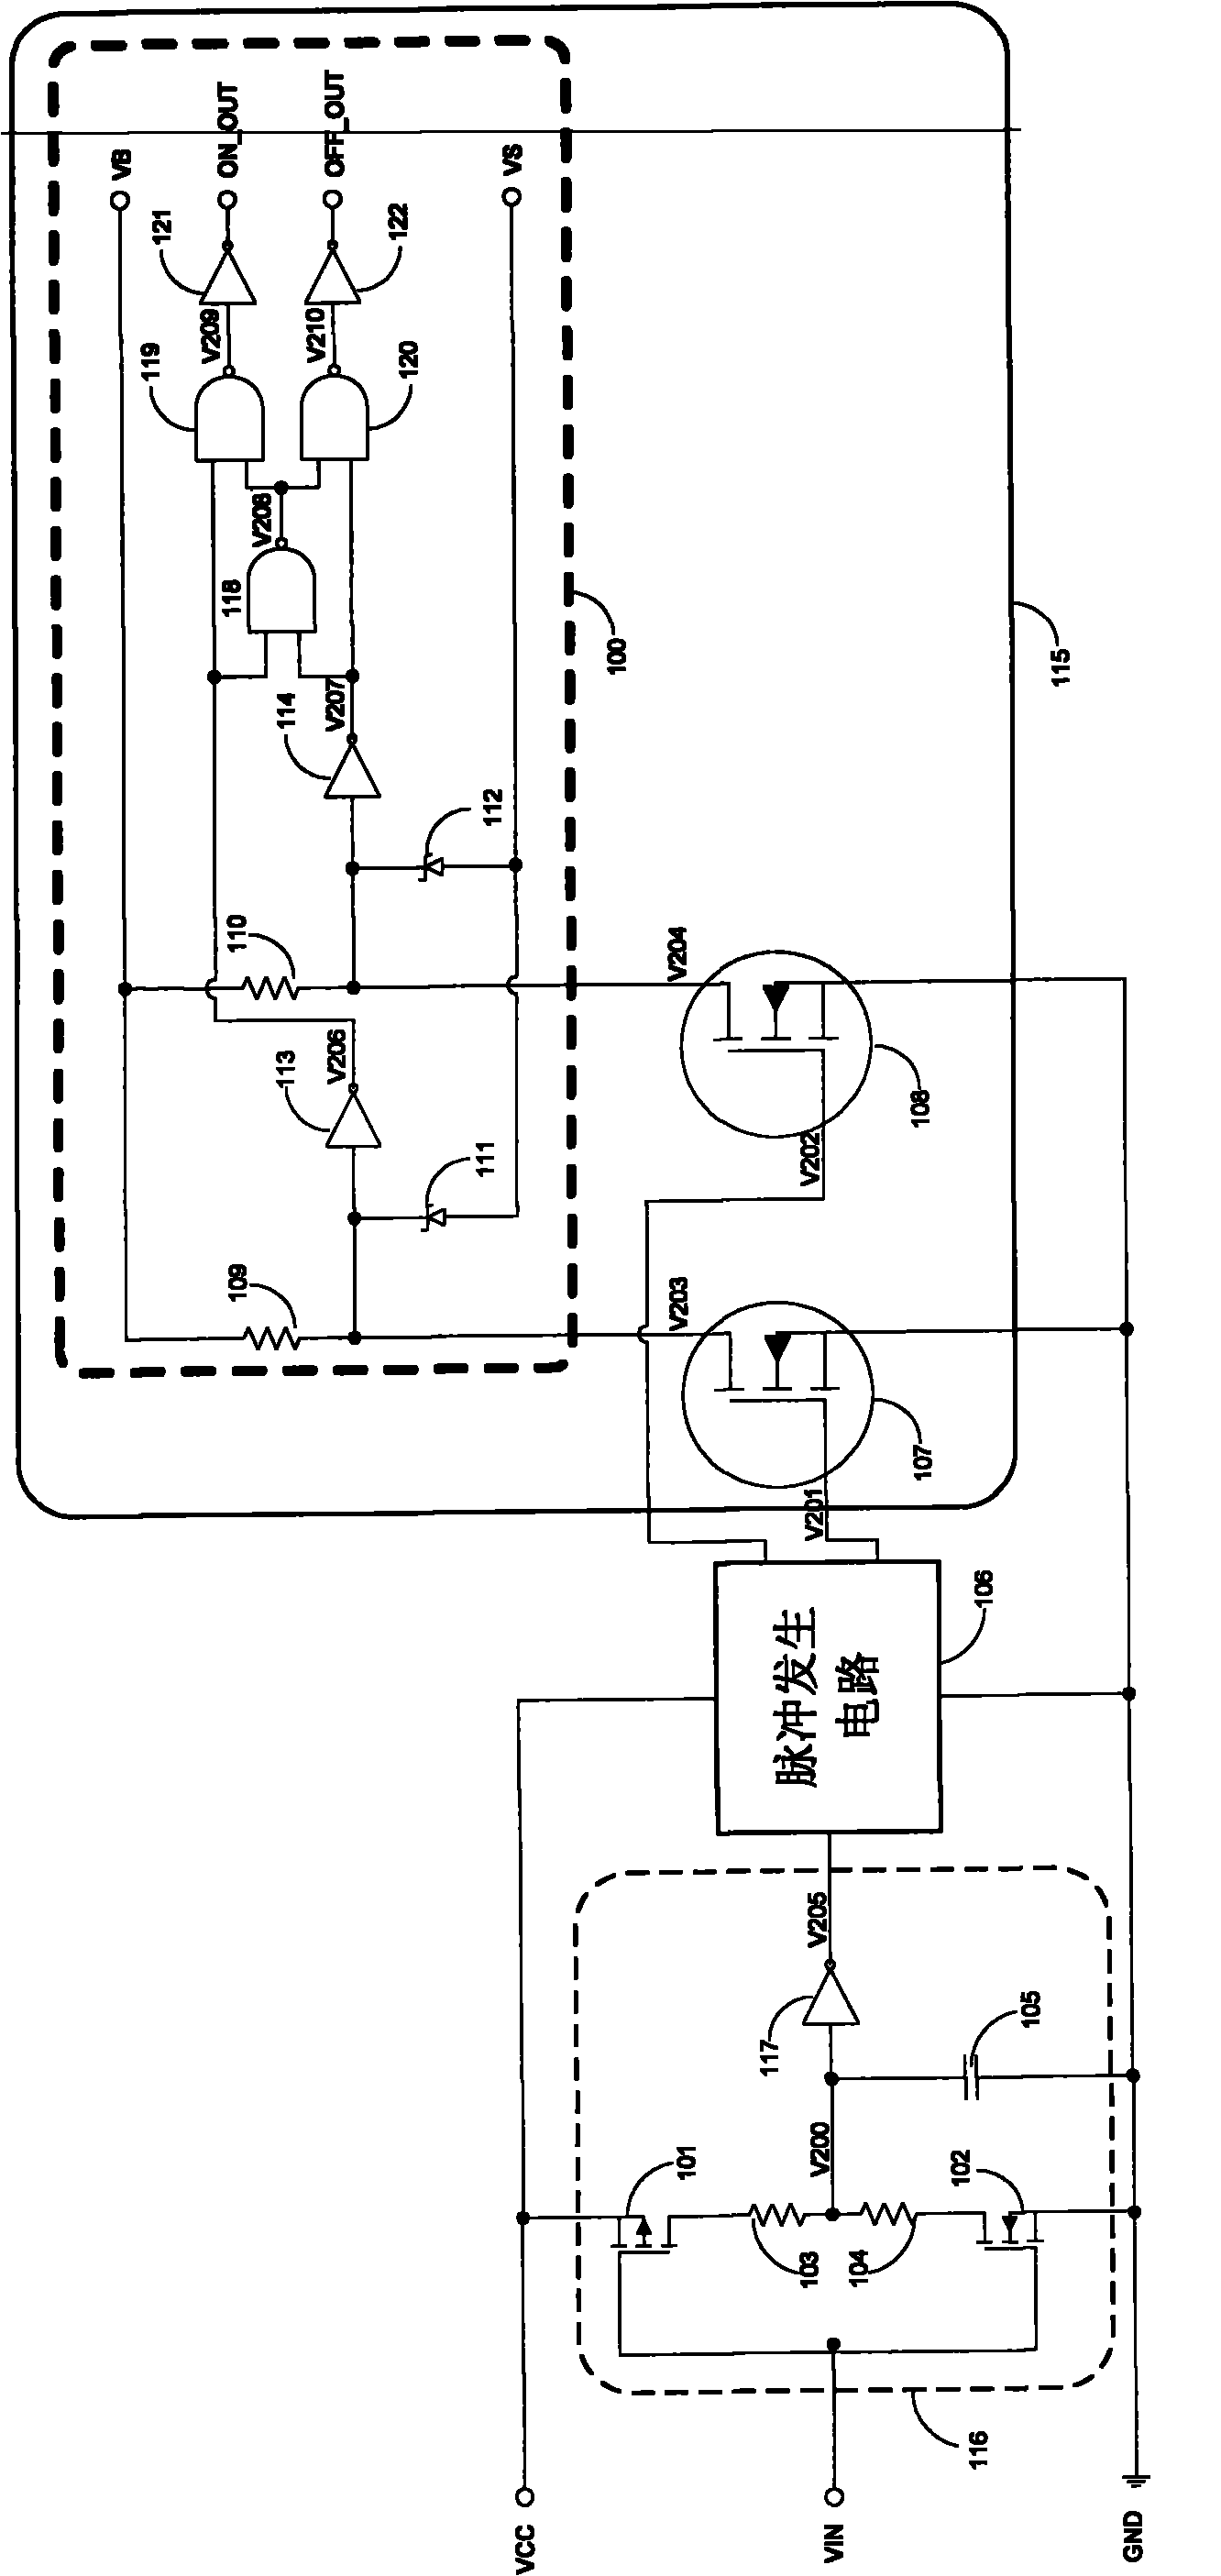 Time-delay circuit for high-voltage integrated circuit